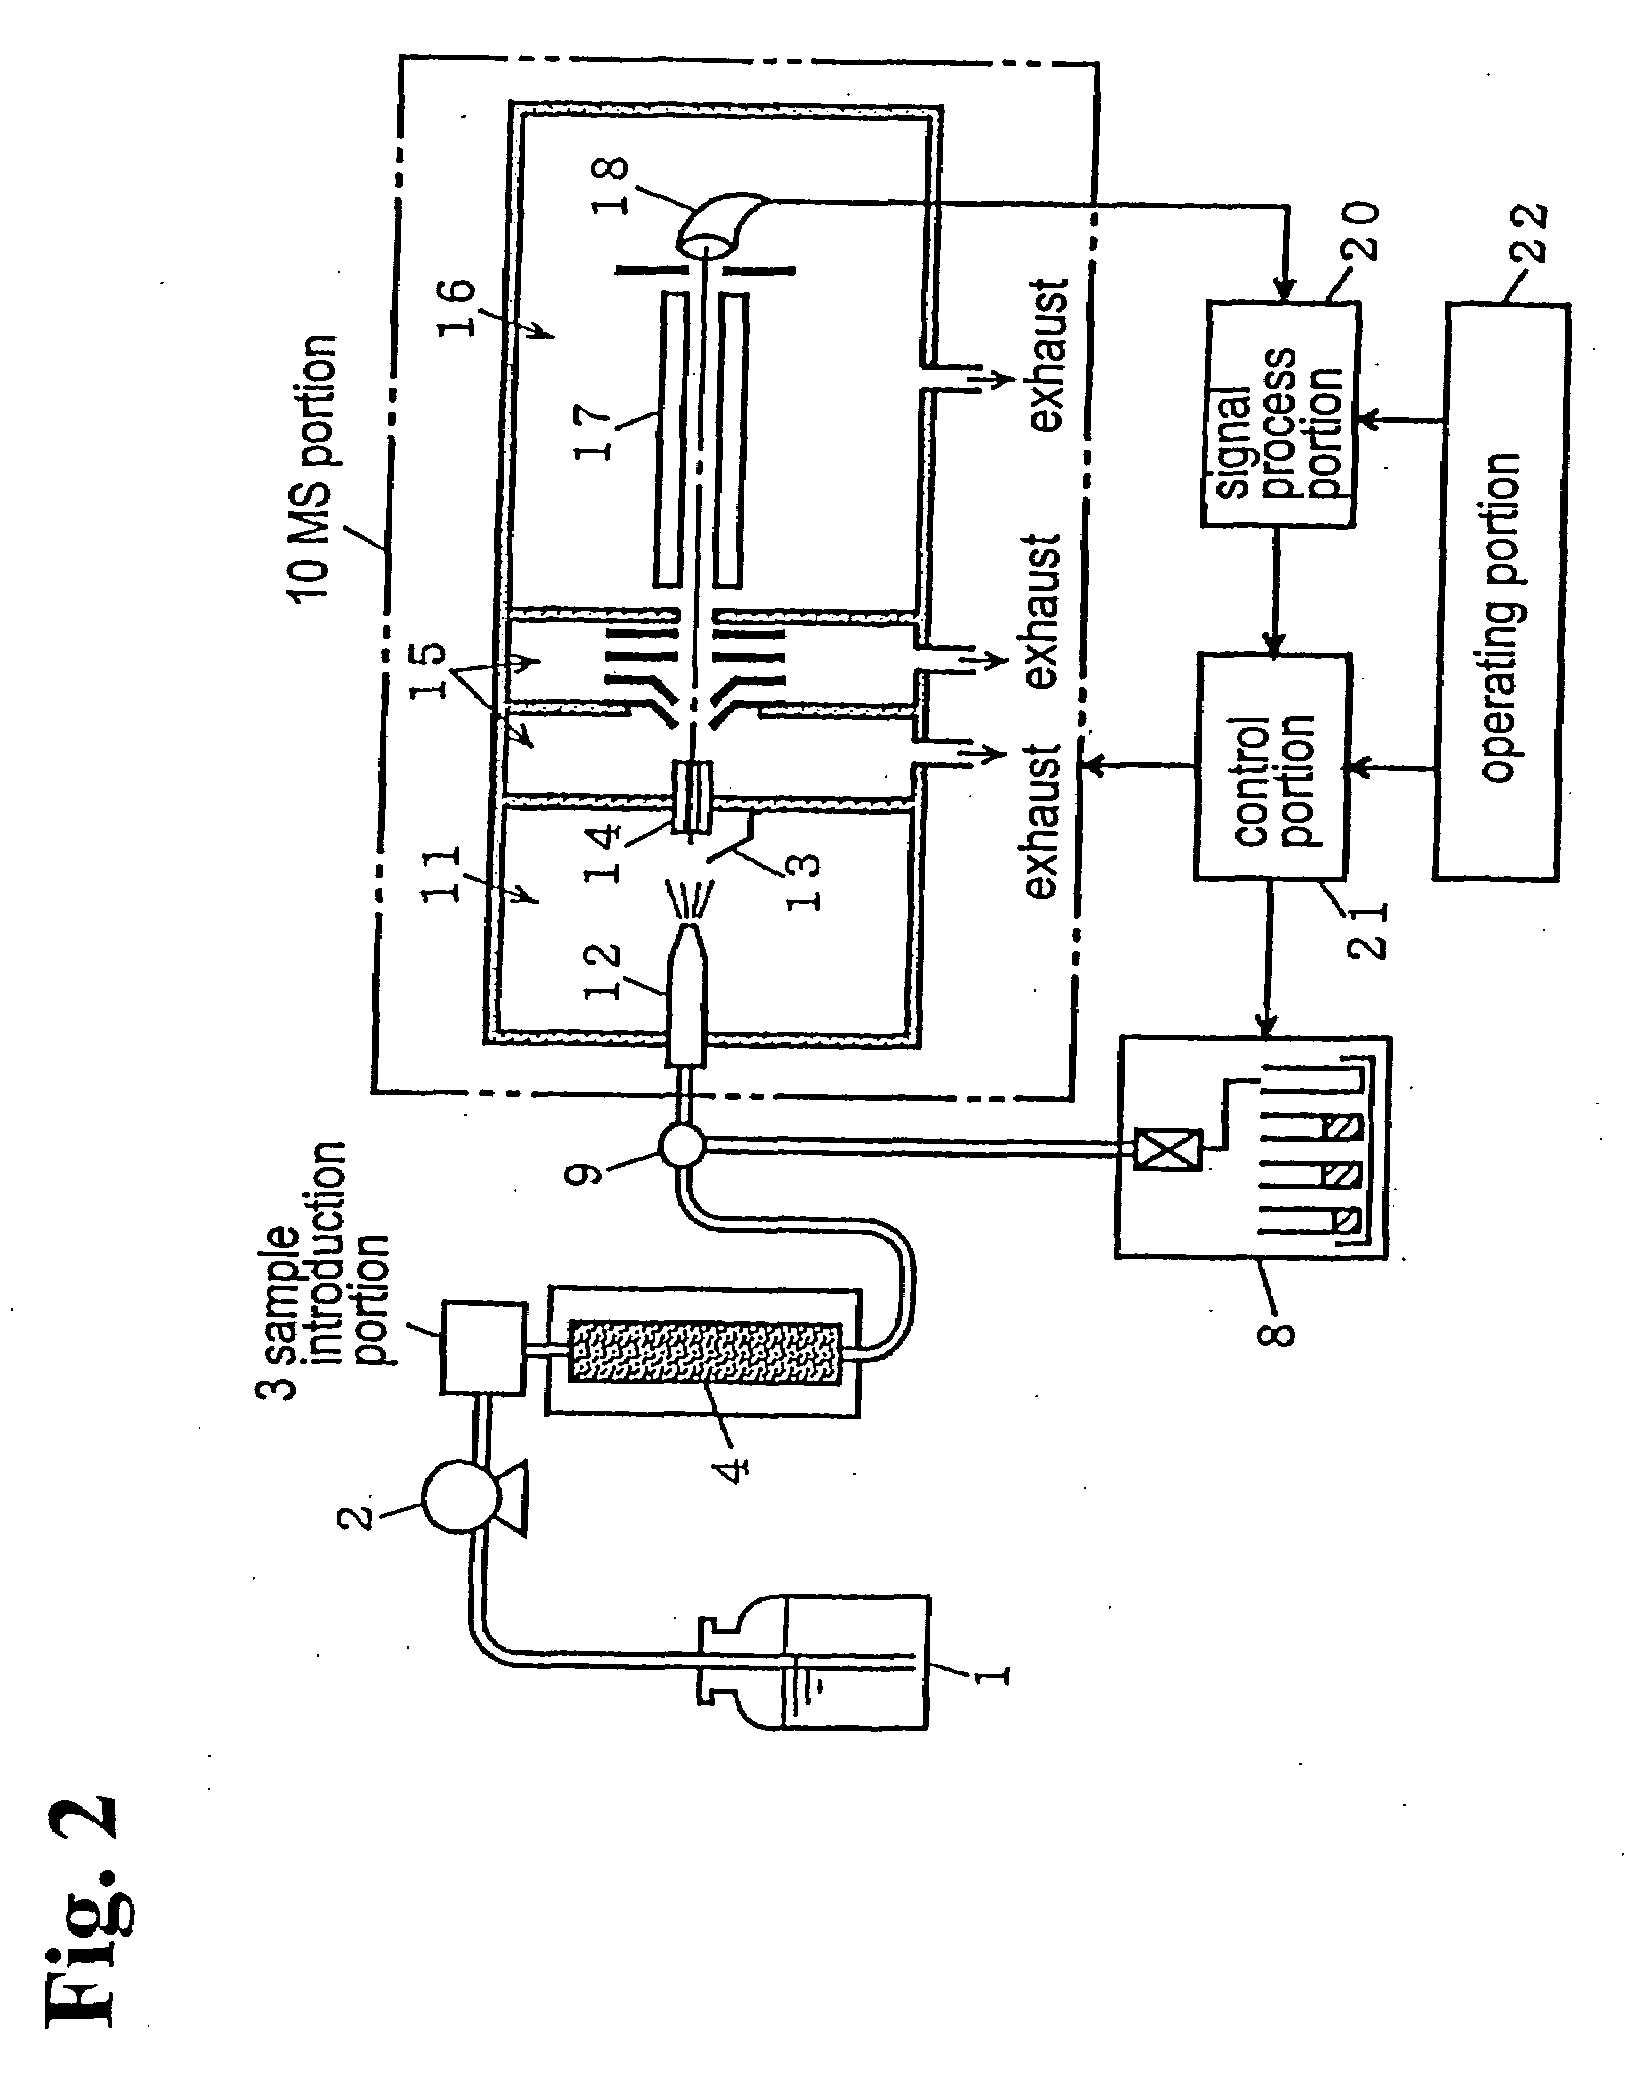 Method for fractionating various components contained in a sample solution by liquid chromatograph mass spectrometer